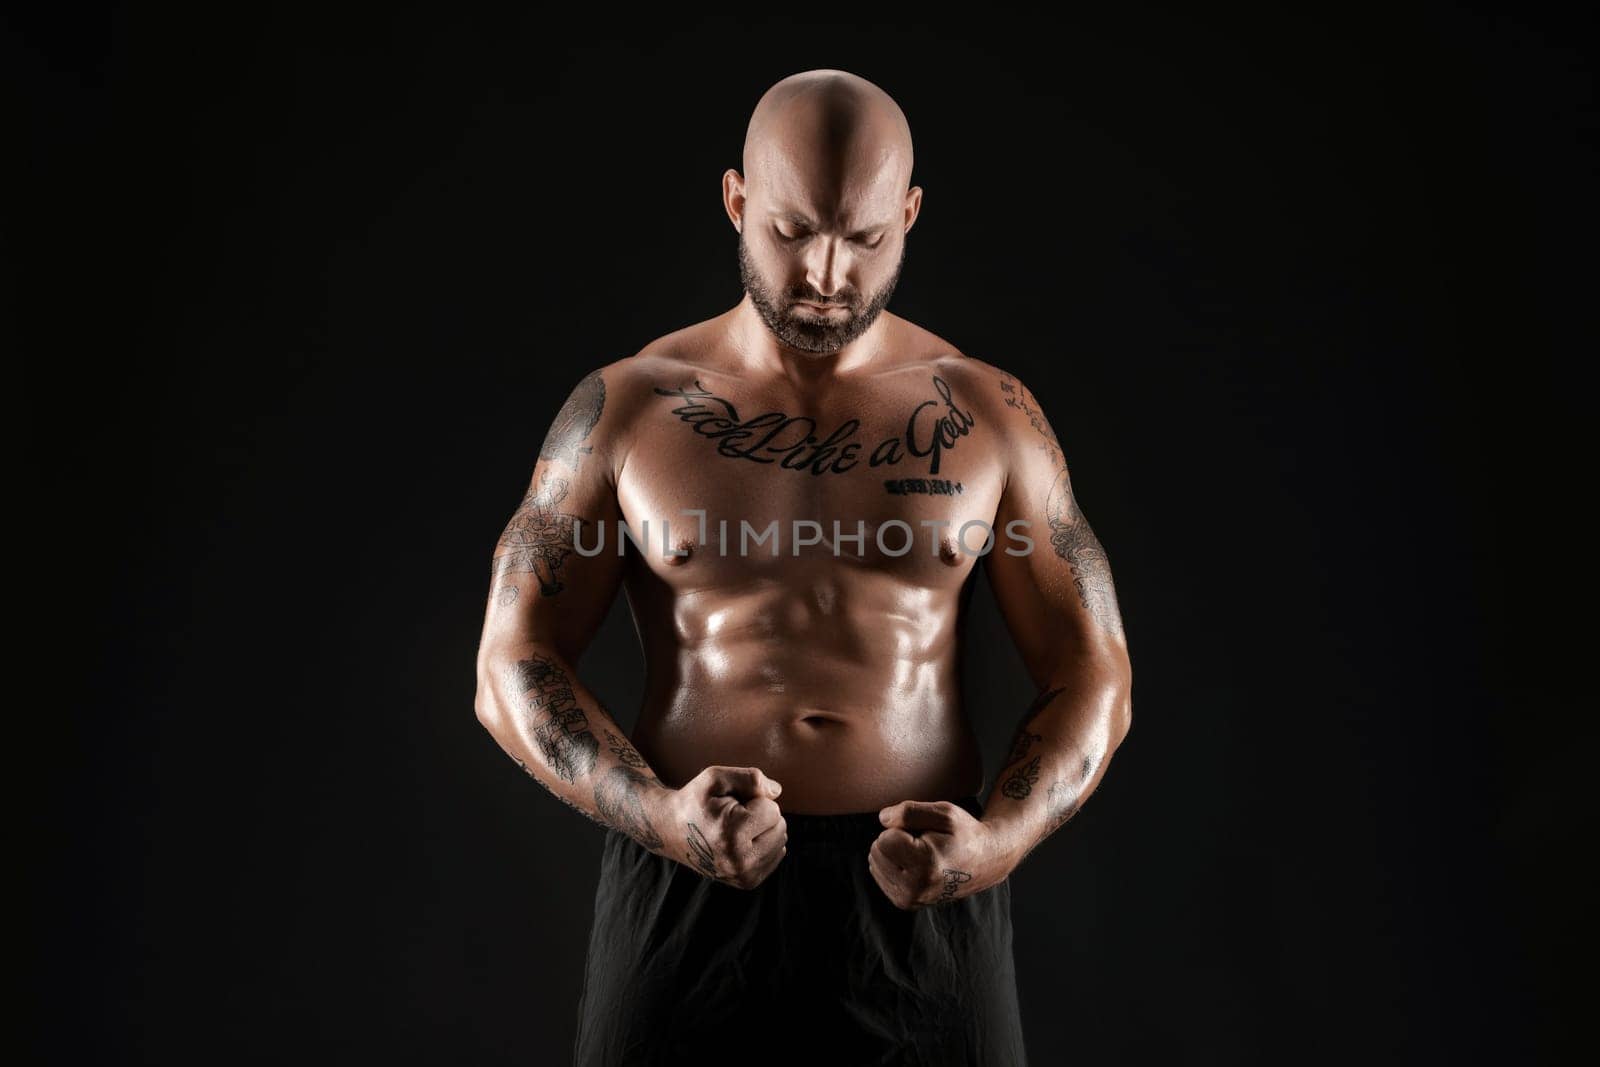 Good-looking bald, bearded, tattooed man in black shorts is demonstating his muscles posing against a black background and looking down. Chic muscular body, fitness, gym, healthy lifestyle concept. Close-up portrait.